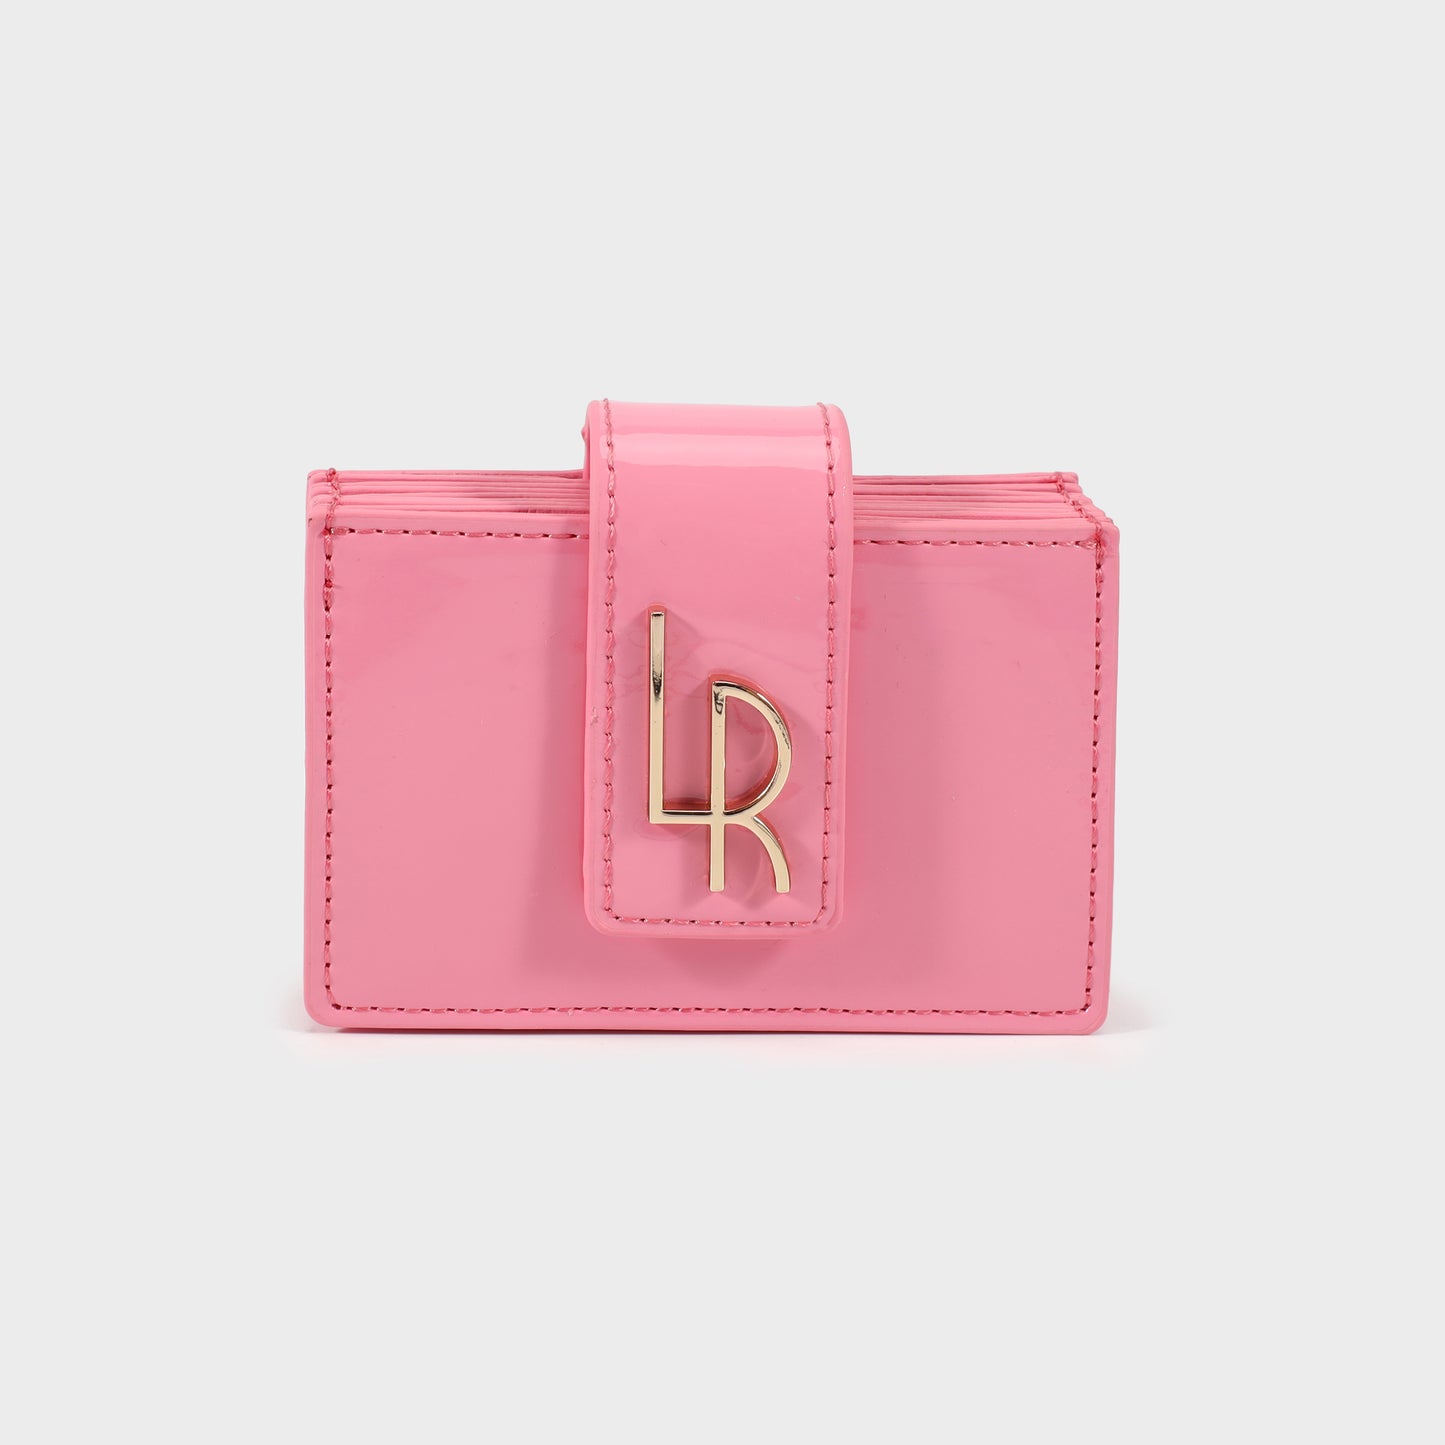 ROSE WALLET 30.05 LE - PARTY PINK